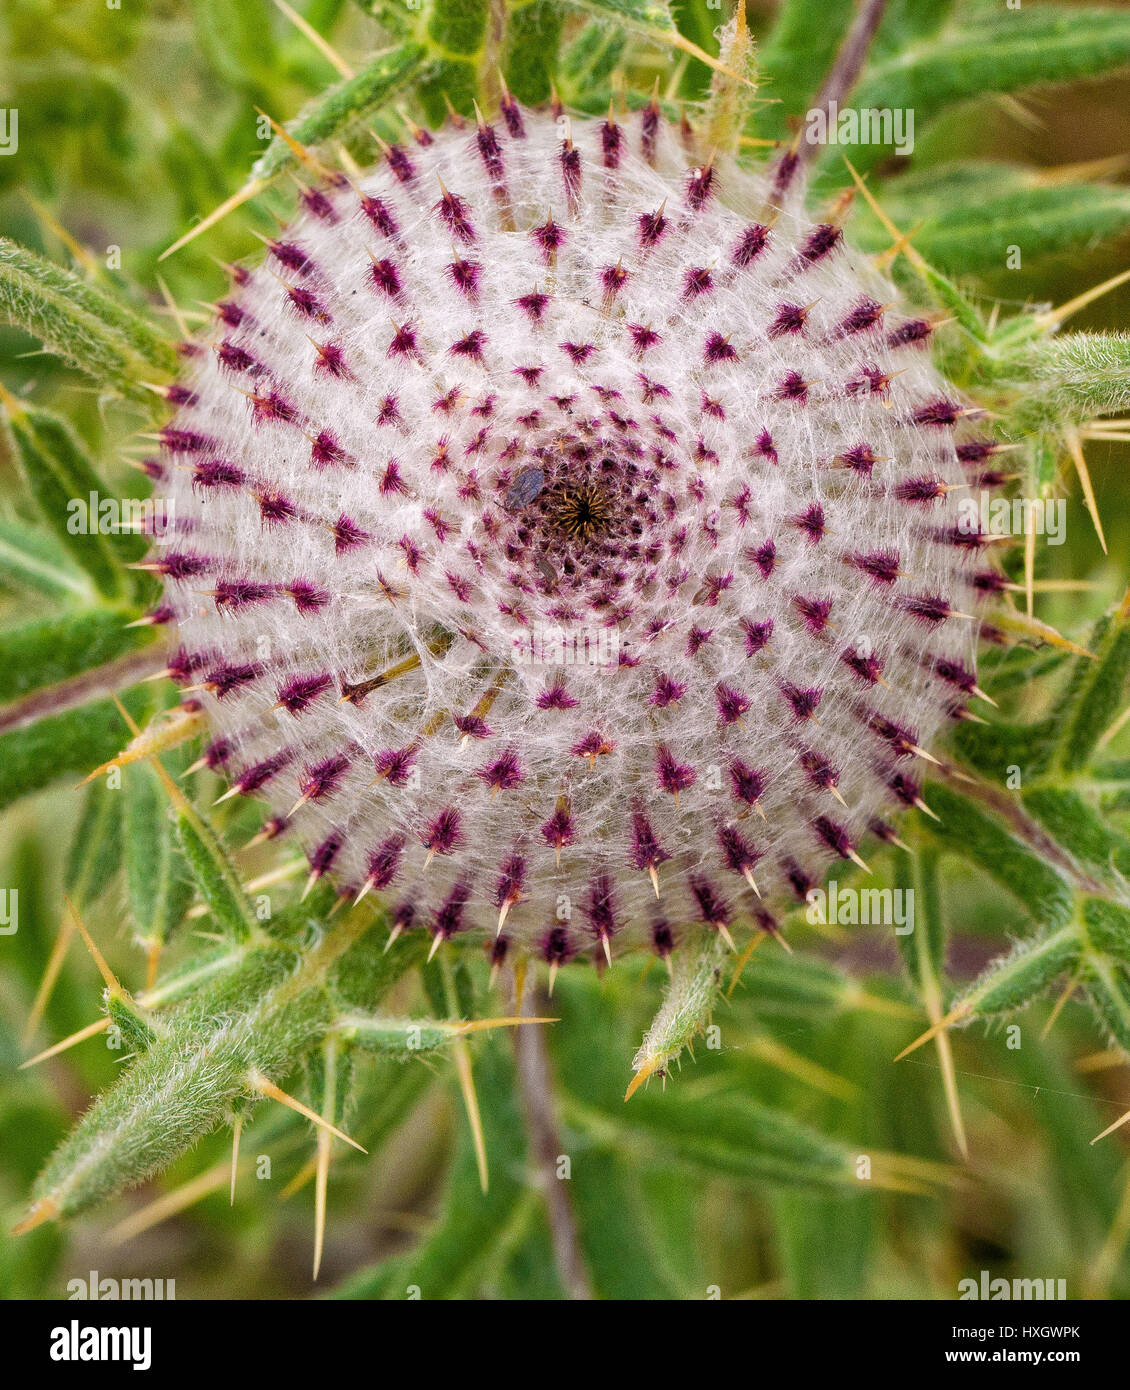 Woolly thistle Cirsium eriophorum flower bud showing the spiral symmetry of the developing flower Stock Photo